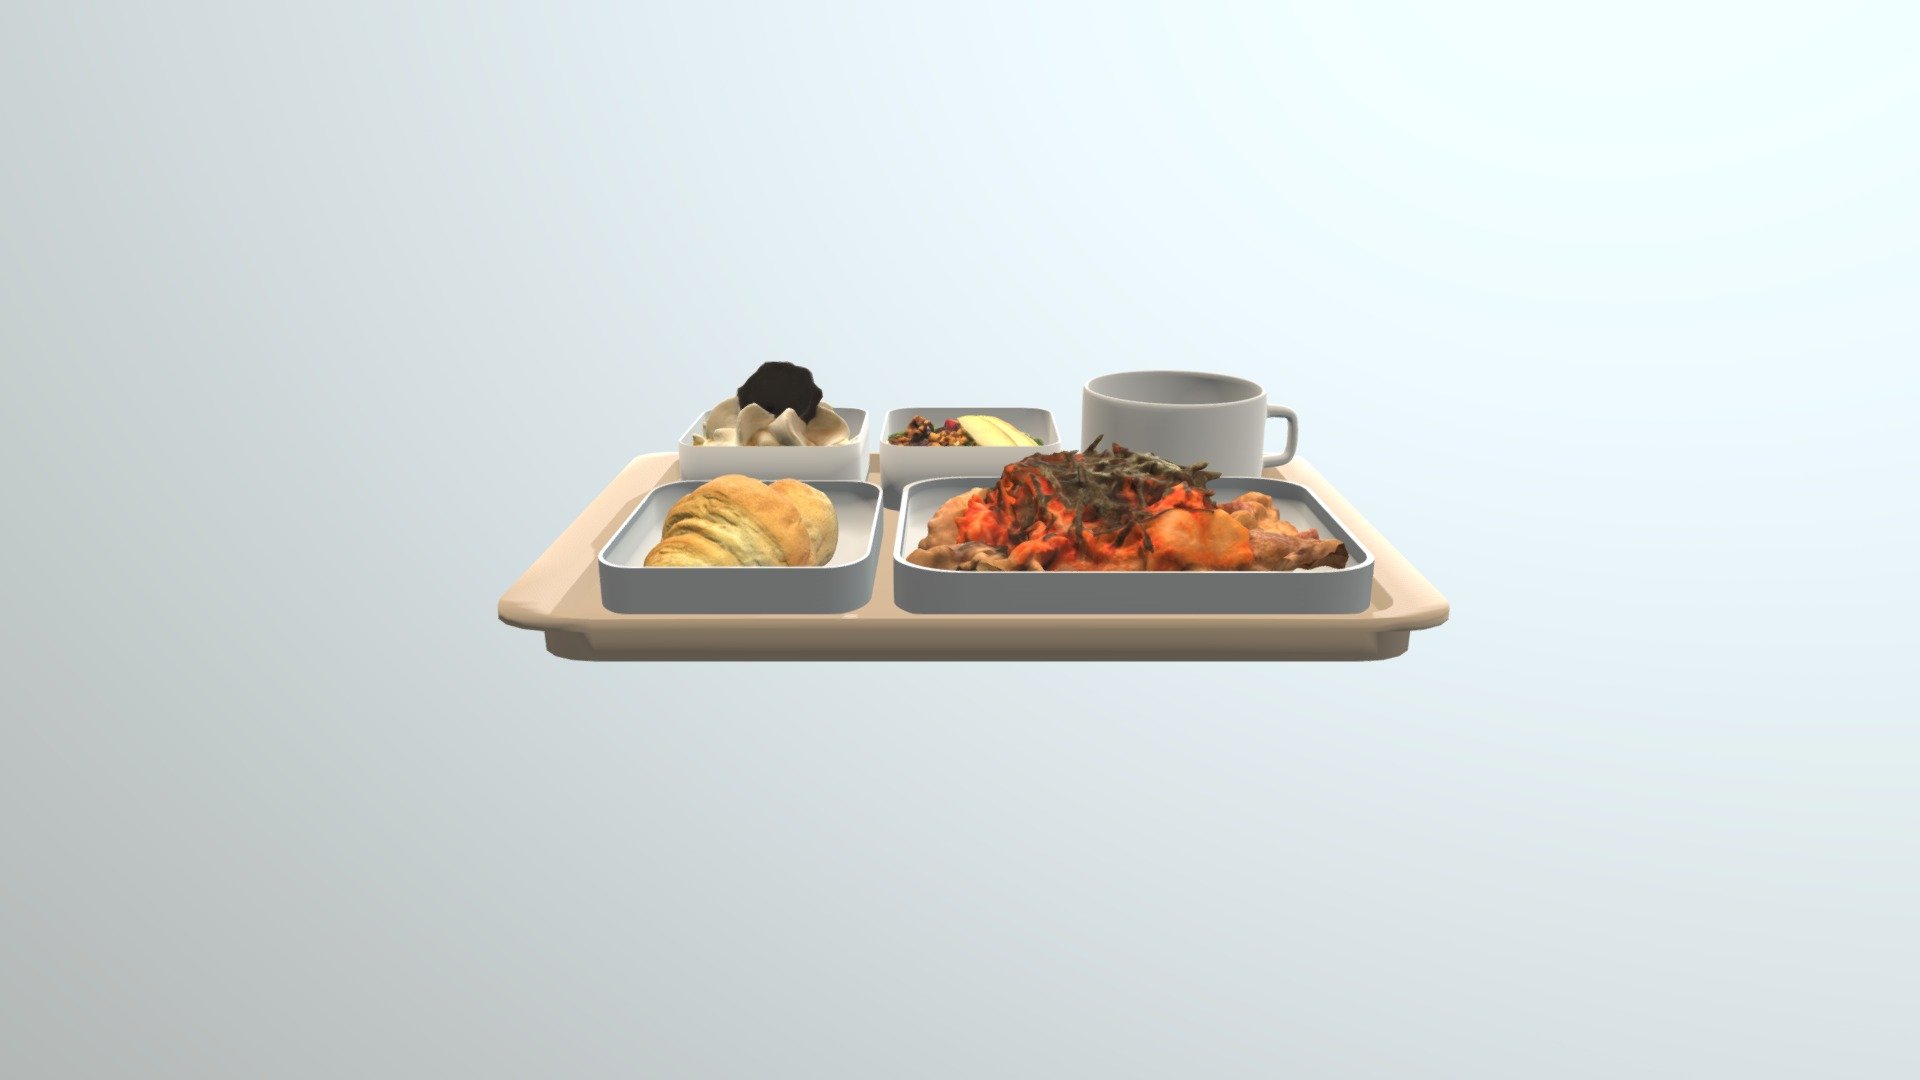 (1)crossaint modified from https://sketchfab.com/3d-models/croissant-8437584c474e4fedab5adbd84a2291e6

(2)meal from https://sketchfab.com/3d-models/beef-bowl-ae47b1d5e8a24082a999691308dc03e5

(3)ice-cream modified from https://sketchfab.com/3d-models/vienna-coffee-with-chantilly-
cd87fcf156eb4379b3f57e738d82d4f3

(4)salad modified from https://sketchfab.com/3d-models/salad-head-5a9706cafdde428696cb5a25bcd51014 - in-flight tray food demo - 3D model by xchen92 3d model